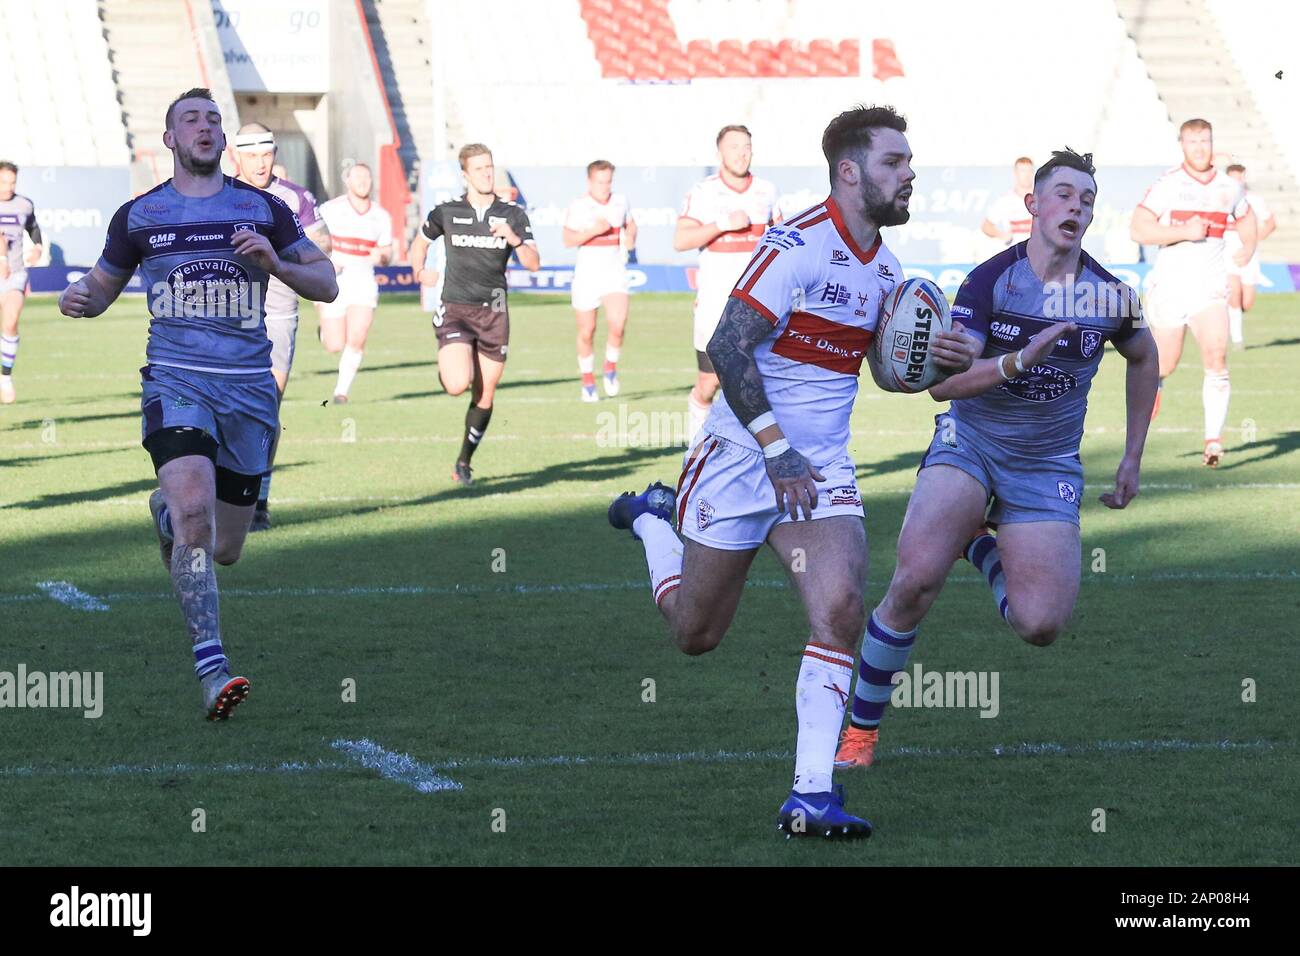 19 janvier 2020, Hull College Craven Park, Kingston Upon Hull, Angleterre ; Rugby League pré saison, Hull Kingston Rovers v Featherstone Rovers : Dague (19) de Hull KR brise les Featherstone Crédit défense : David Greaves/News Images Banque D'Images